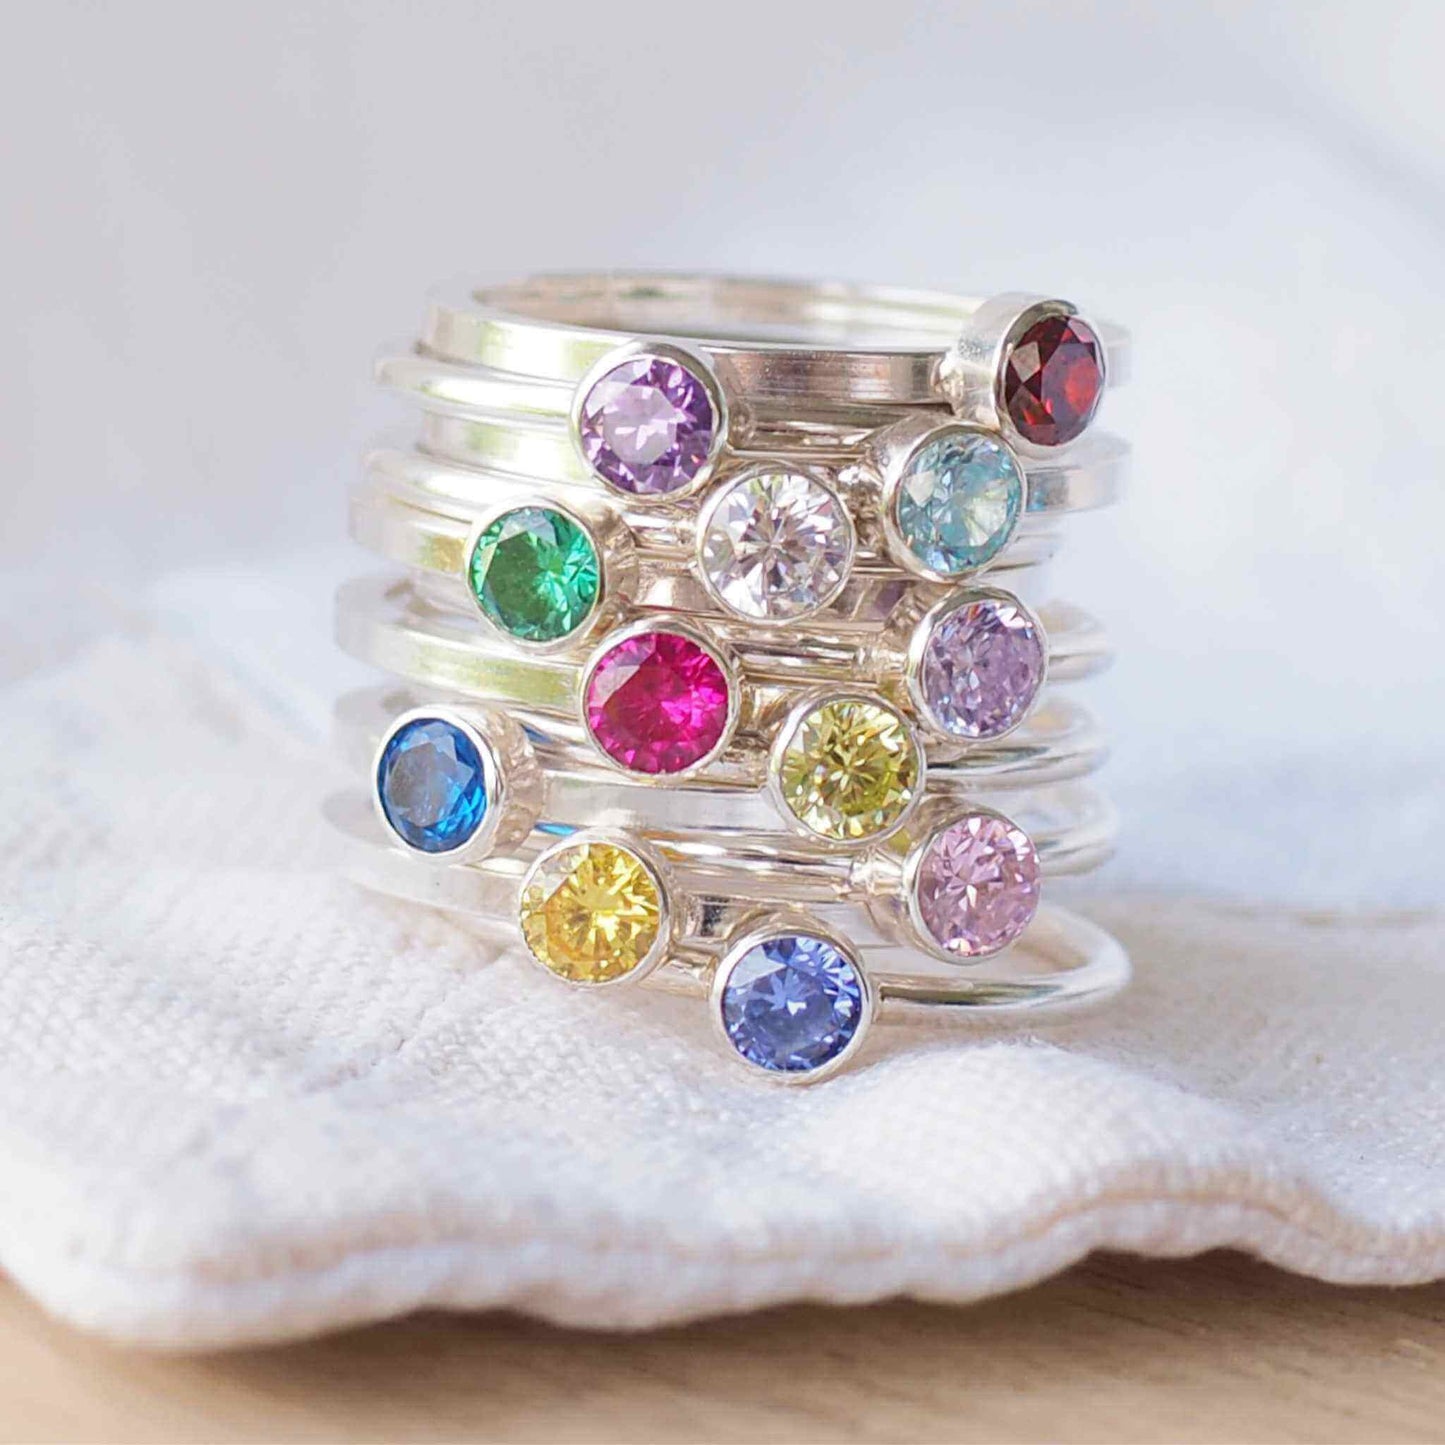 Stack of twelve birthstone rings in Sterling Silver with a round coloured cubic zirconia in 4mm size to mark birthstones for every month. Rainbow bright coloured gems with round or square silver bands to create a modern minimalist gemstone ring. Handmade in Scotland by maram jewellery